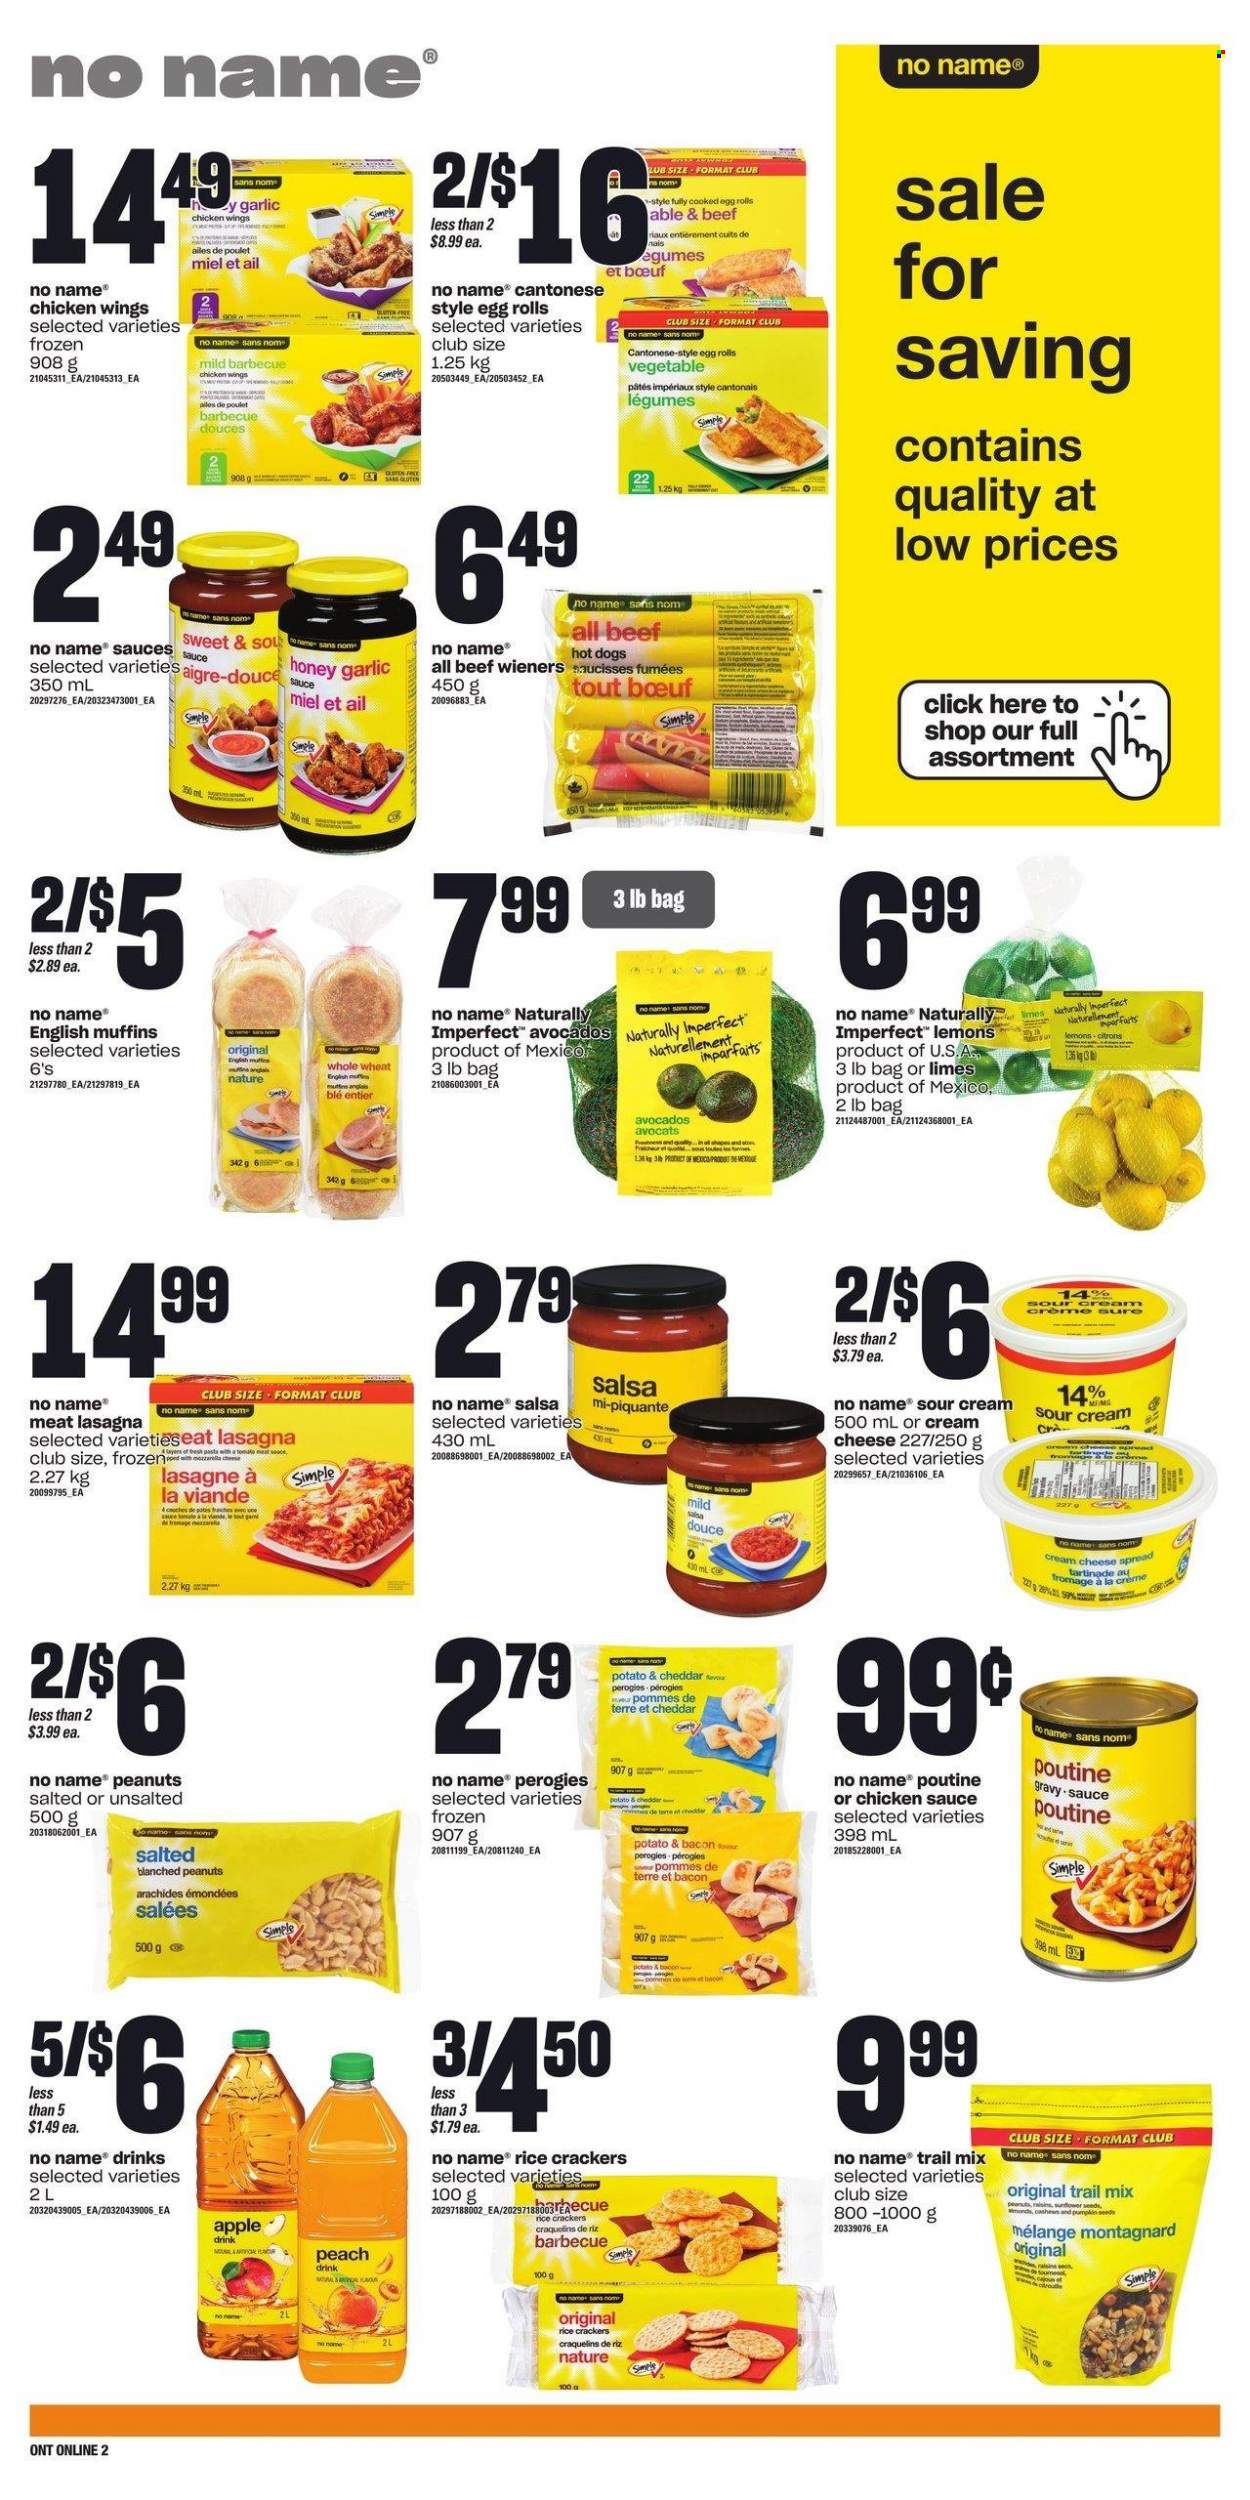 thumbnail - Loblaws Flyer - February 02, 2023 - February 08, 2023 - Sales products - english muffins, avocado, limes, lemons, No Name, hot dog, pasta, egg rolls, lasagna meal, bacon, cheese spread, sour cream, chicken wings, crackers, rice crackers, salsa, garlic sauce, honey, peanuts, trail mix, Sure, Apple. Page 8.